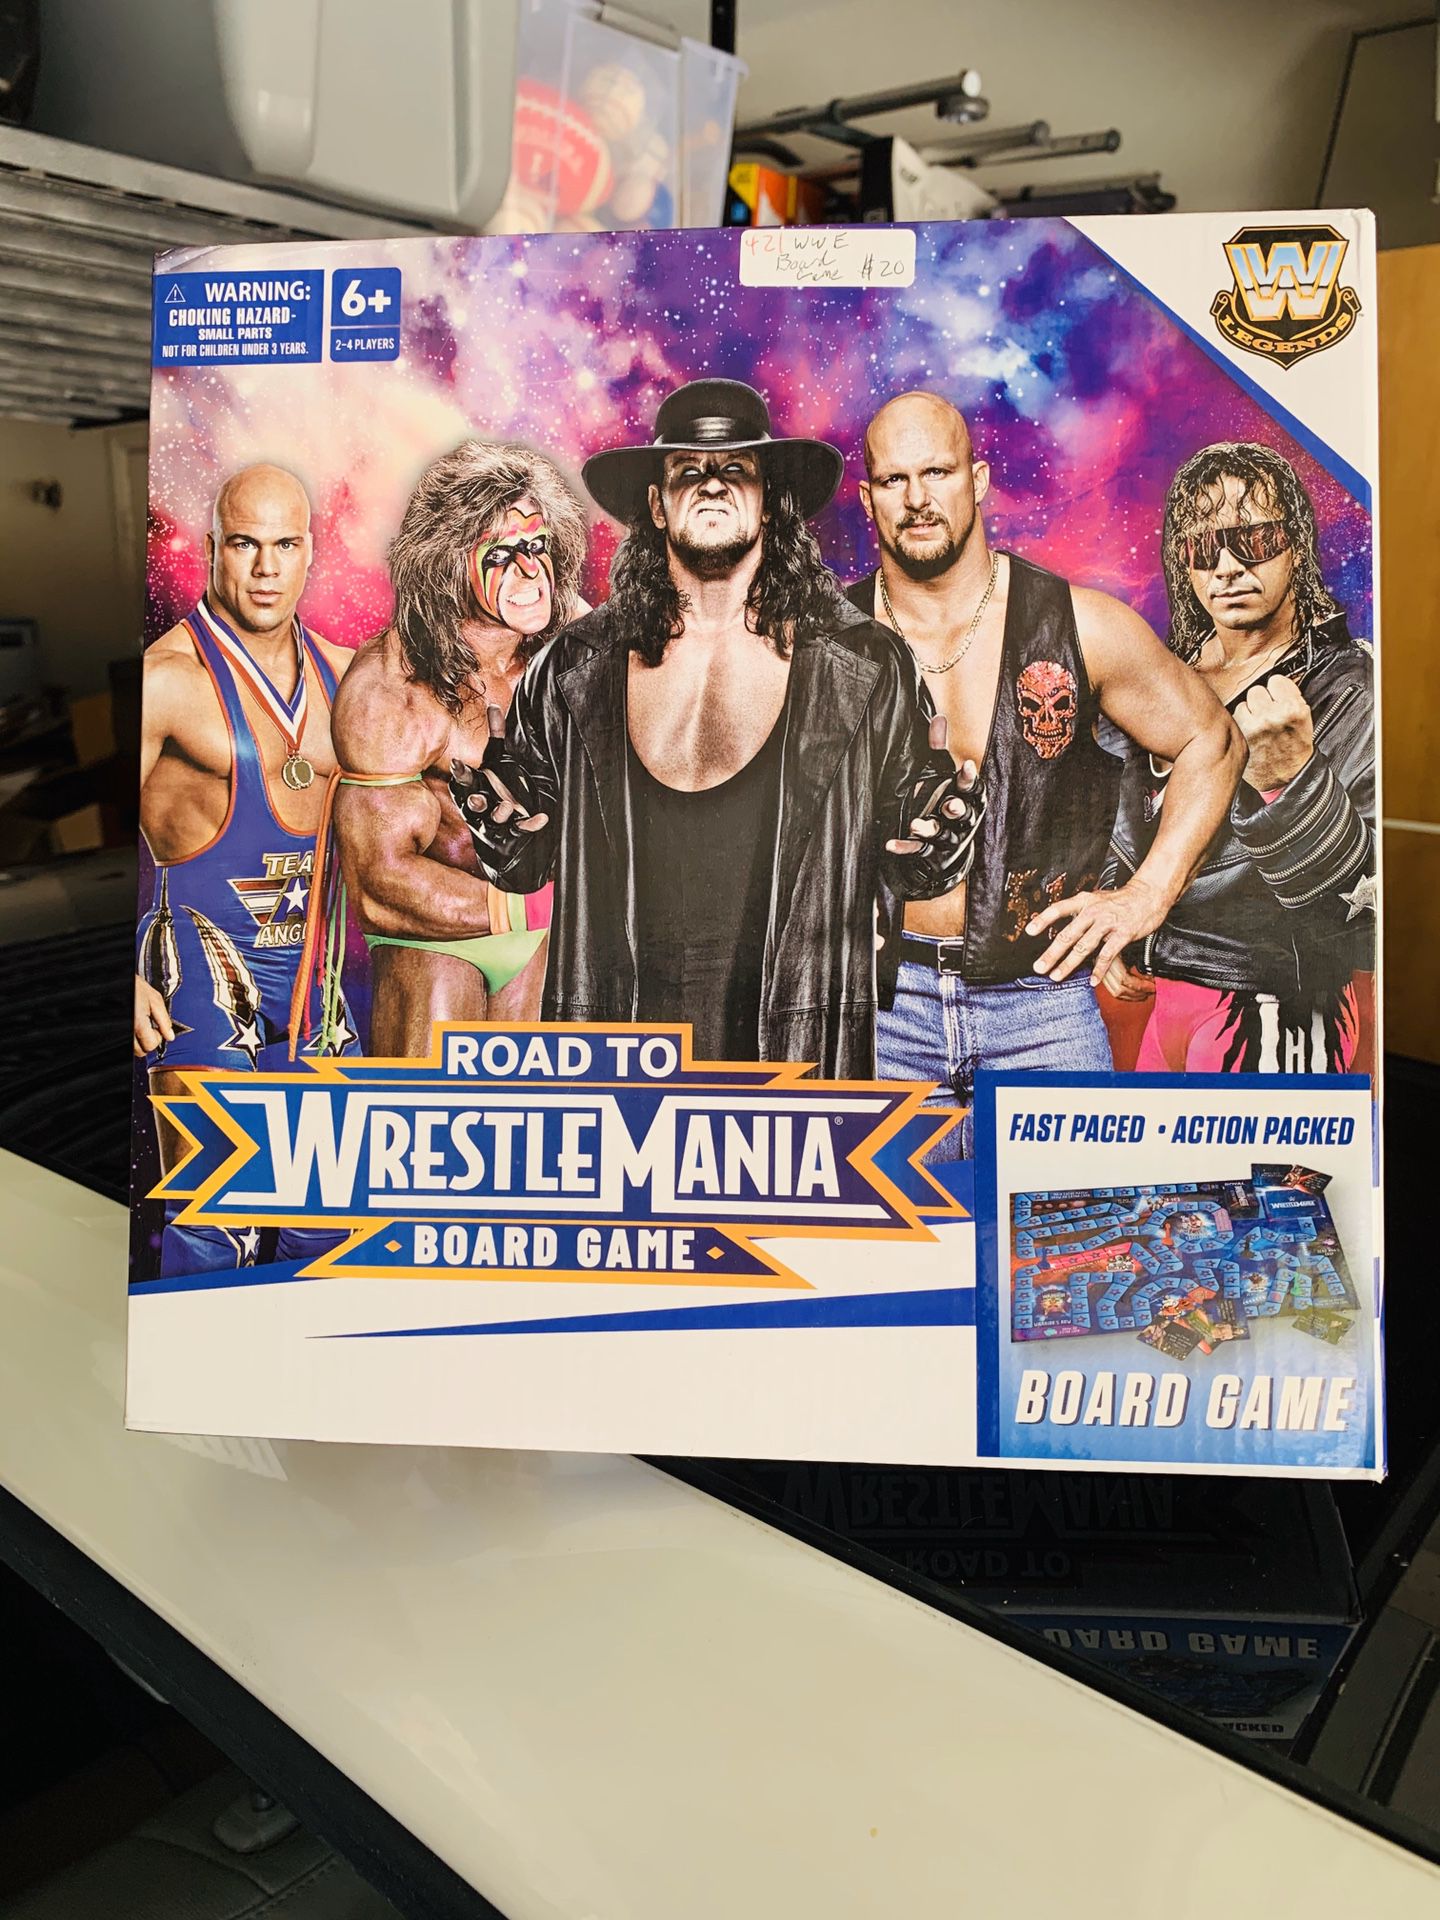 WWE road to wrestle mania board game toy